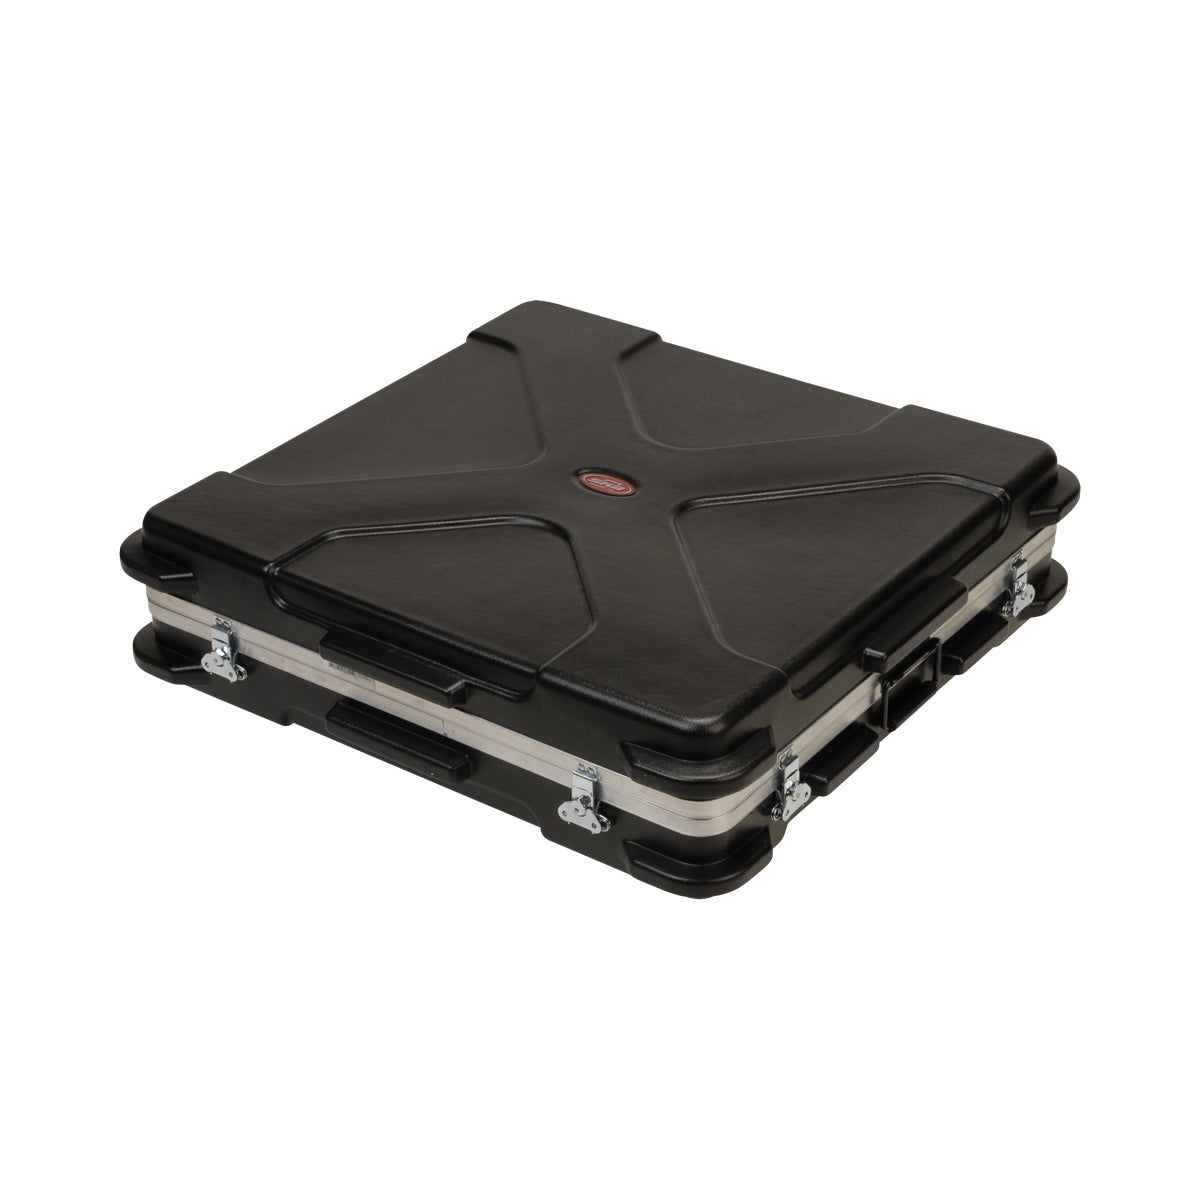 SKB 1SKB-3331 ATA Style Utility Case with Corner Cleats